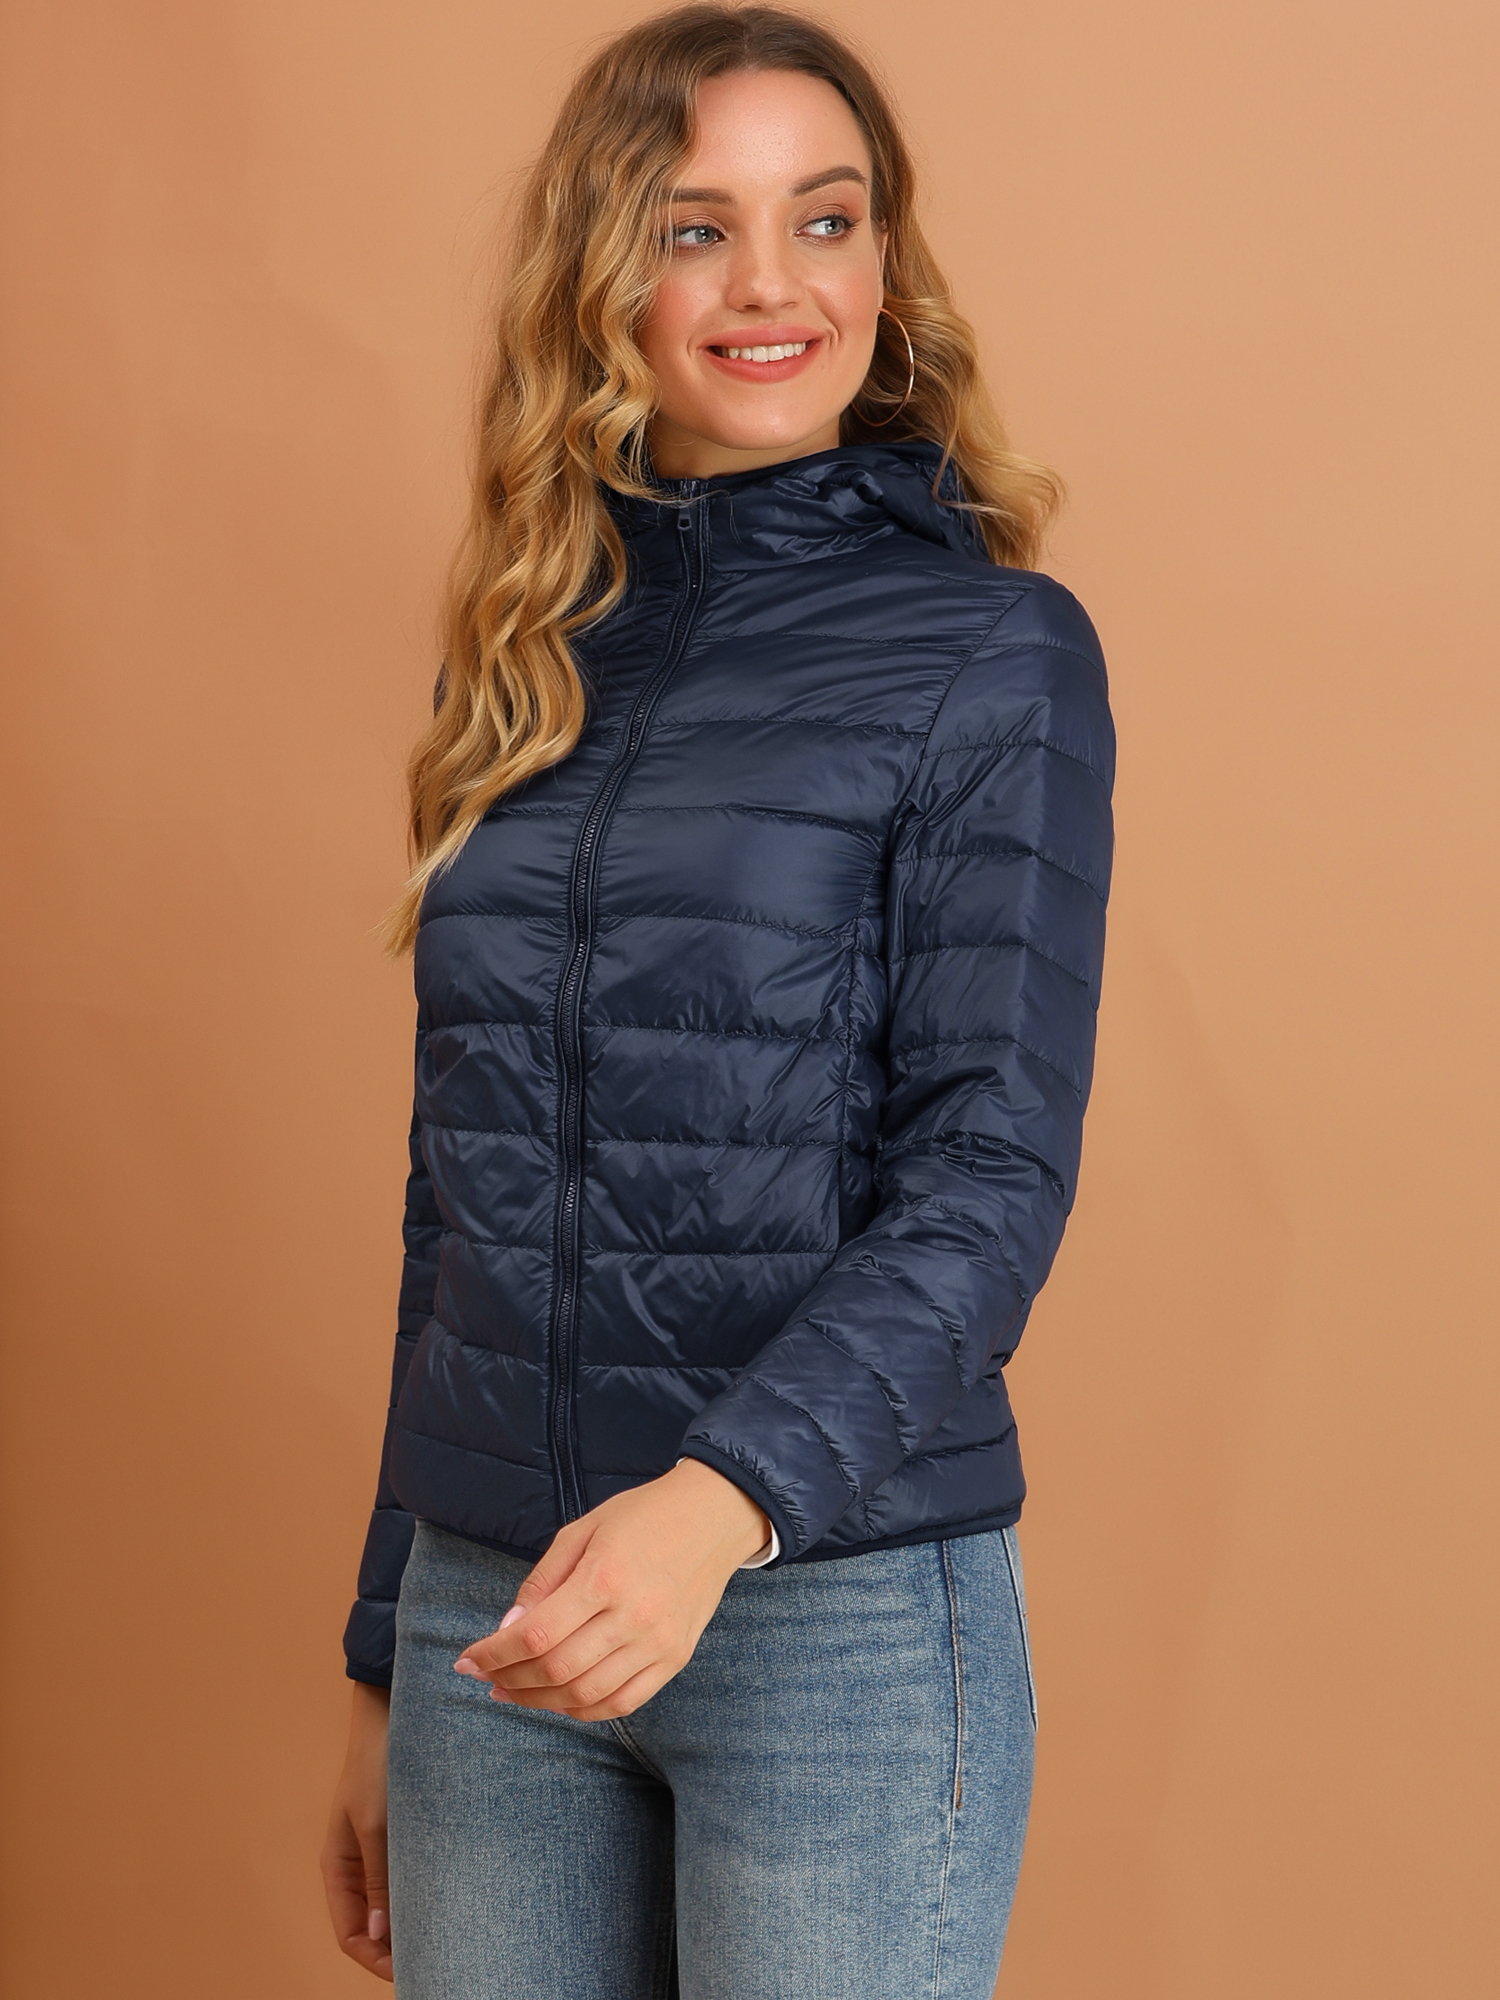 Unique Bargains Allegra K Women's Hooded Packable Thickened Down Jacket Coat